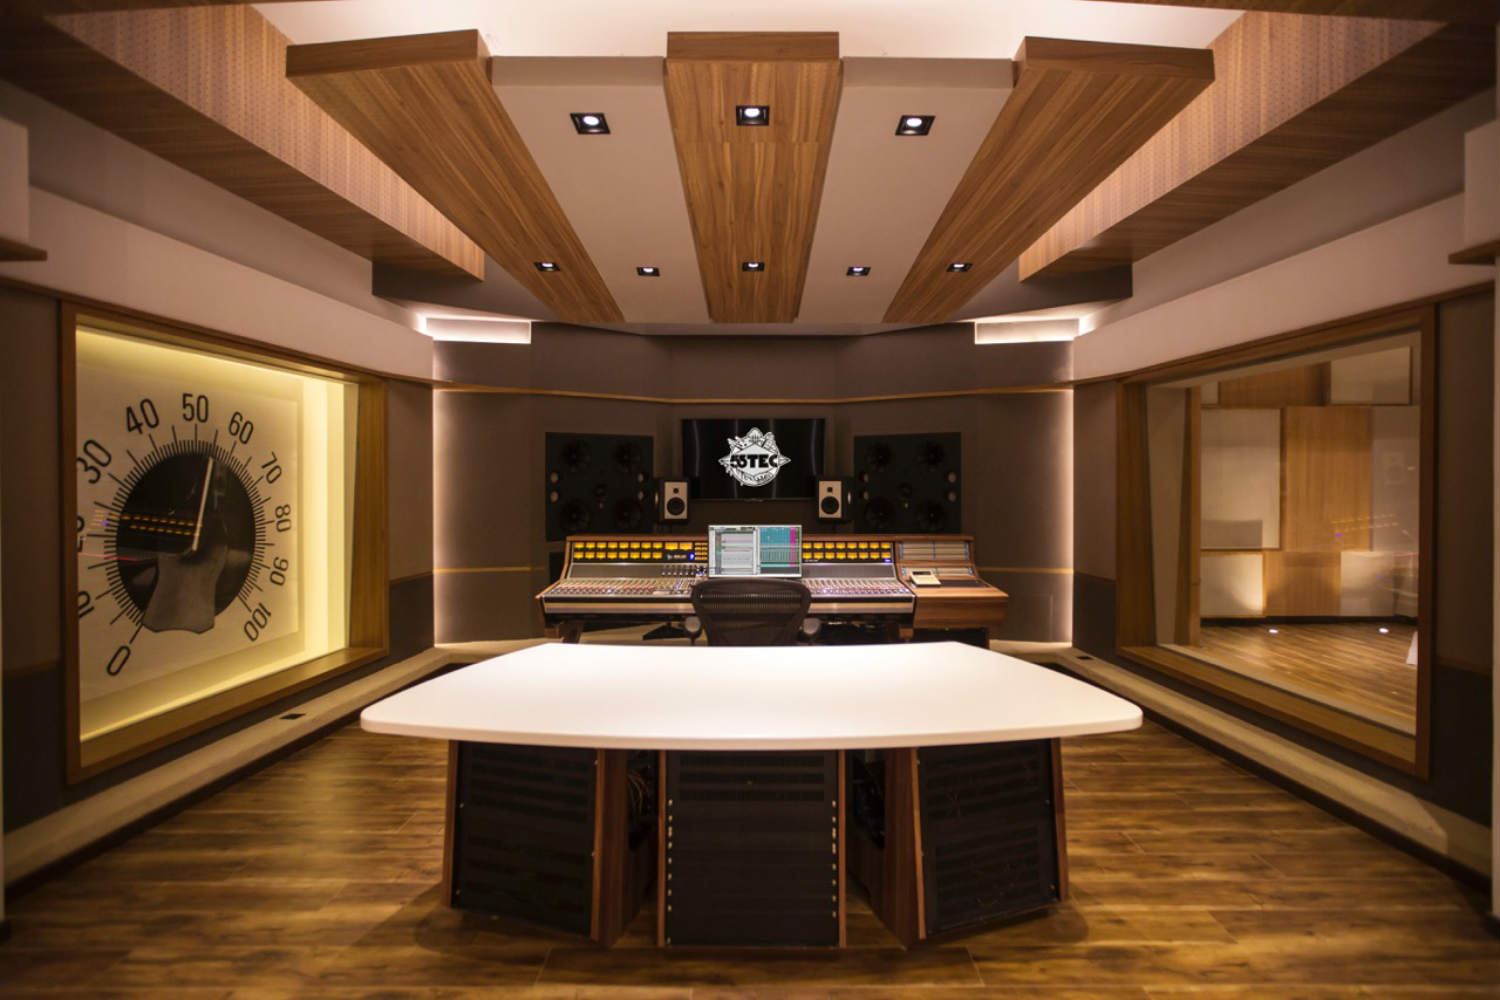 55TEC Studio in Beijing, China - New World-Class Recording Studio designed by WSDG owned by Li You